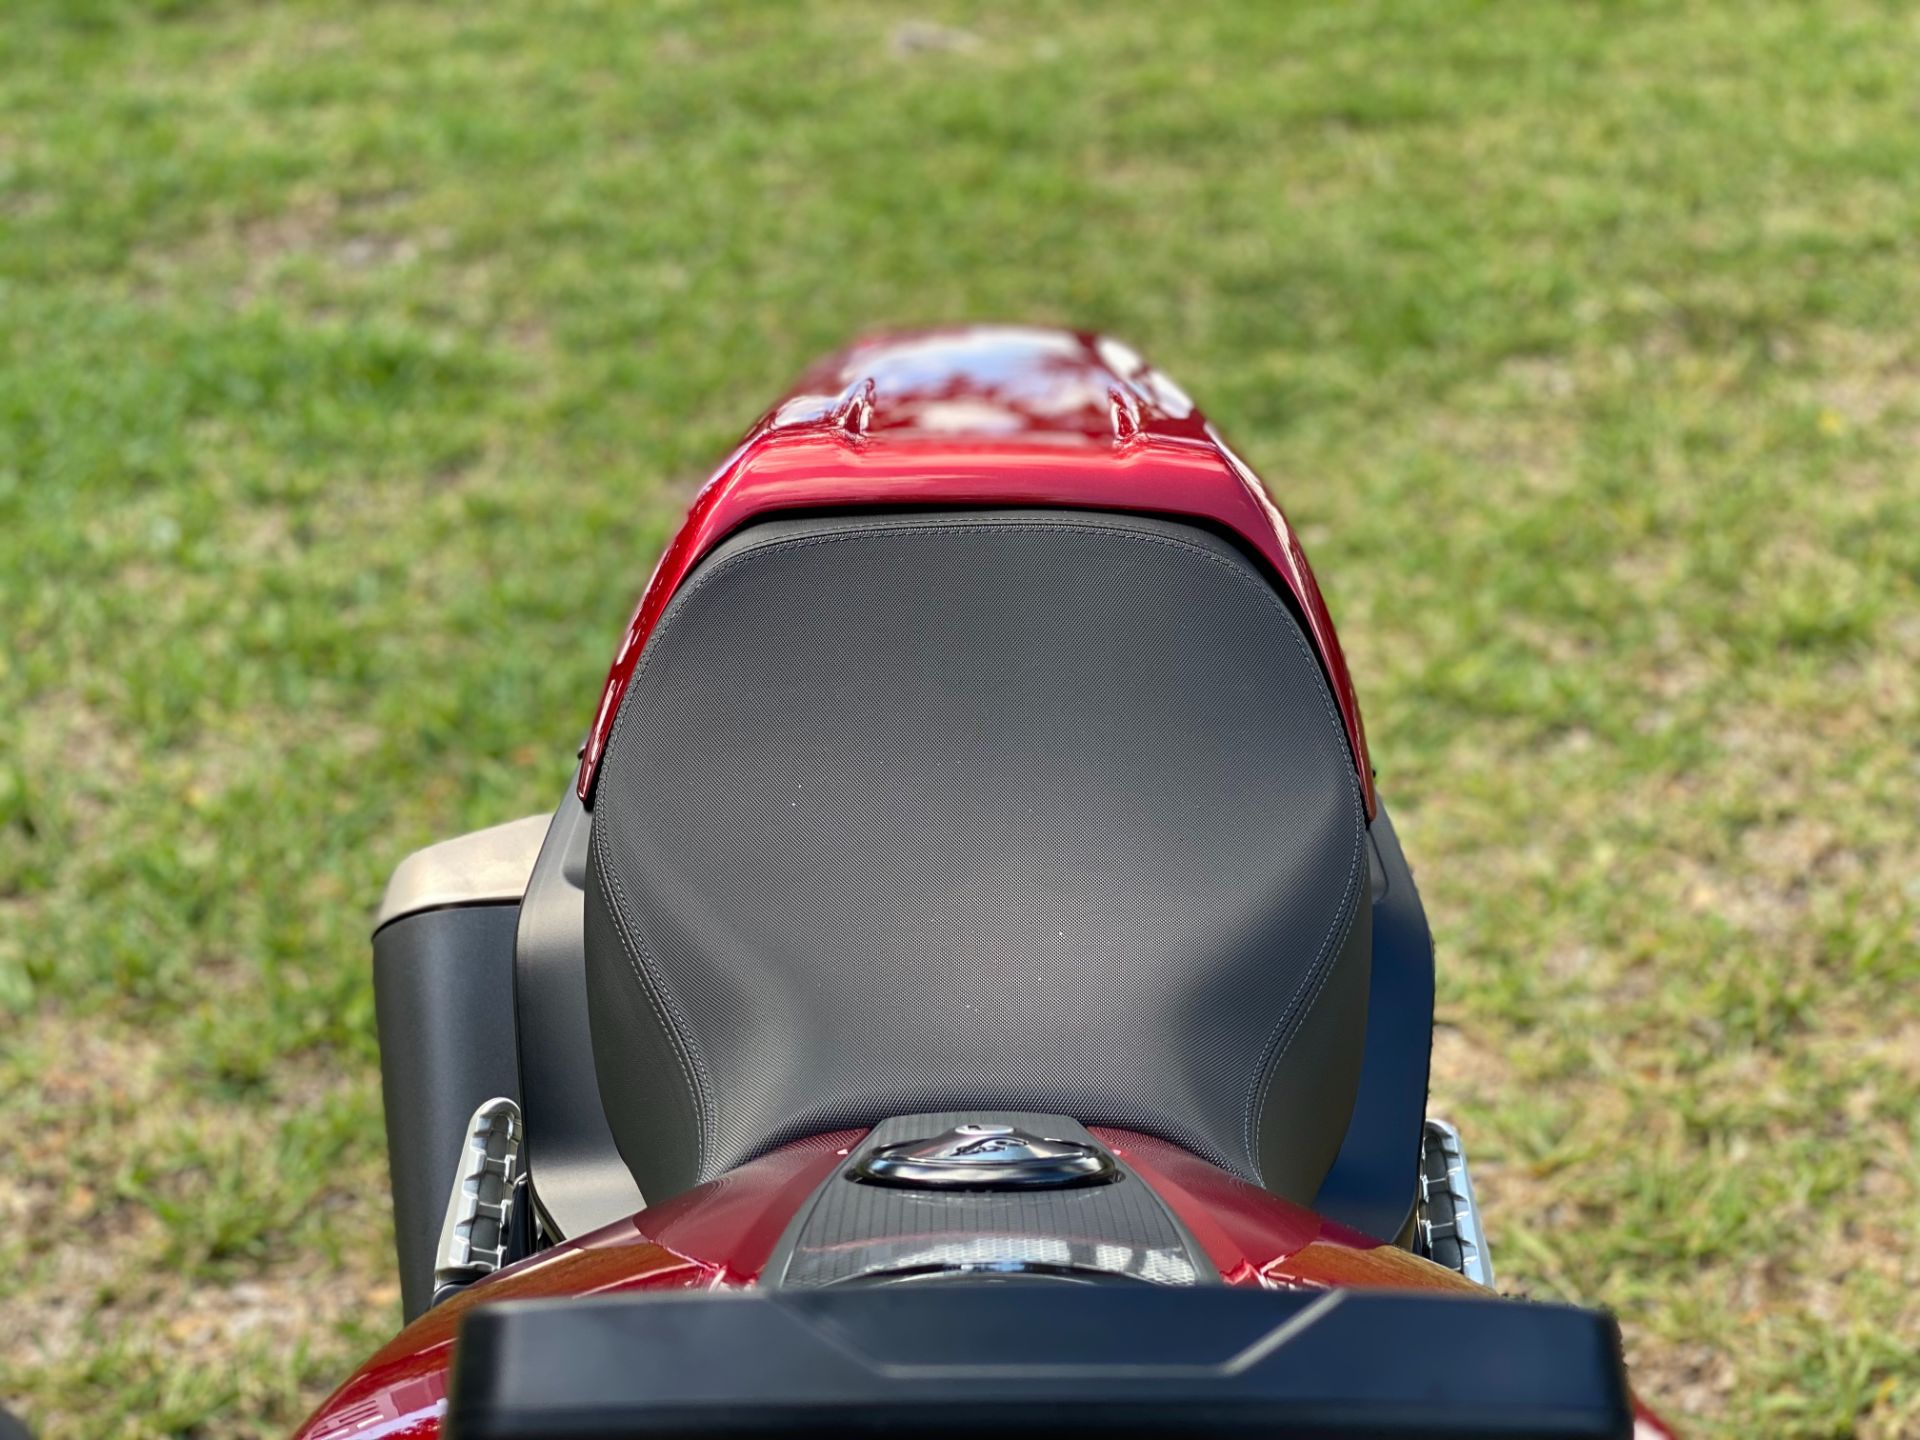 2019 Indian Motorcycle FTR™ 1200 S in North Miami Beach, Florida - Photo 10